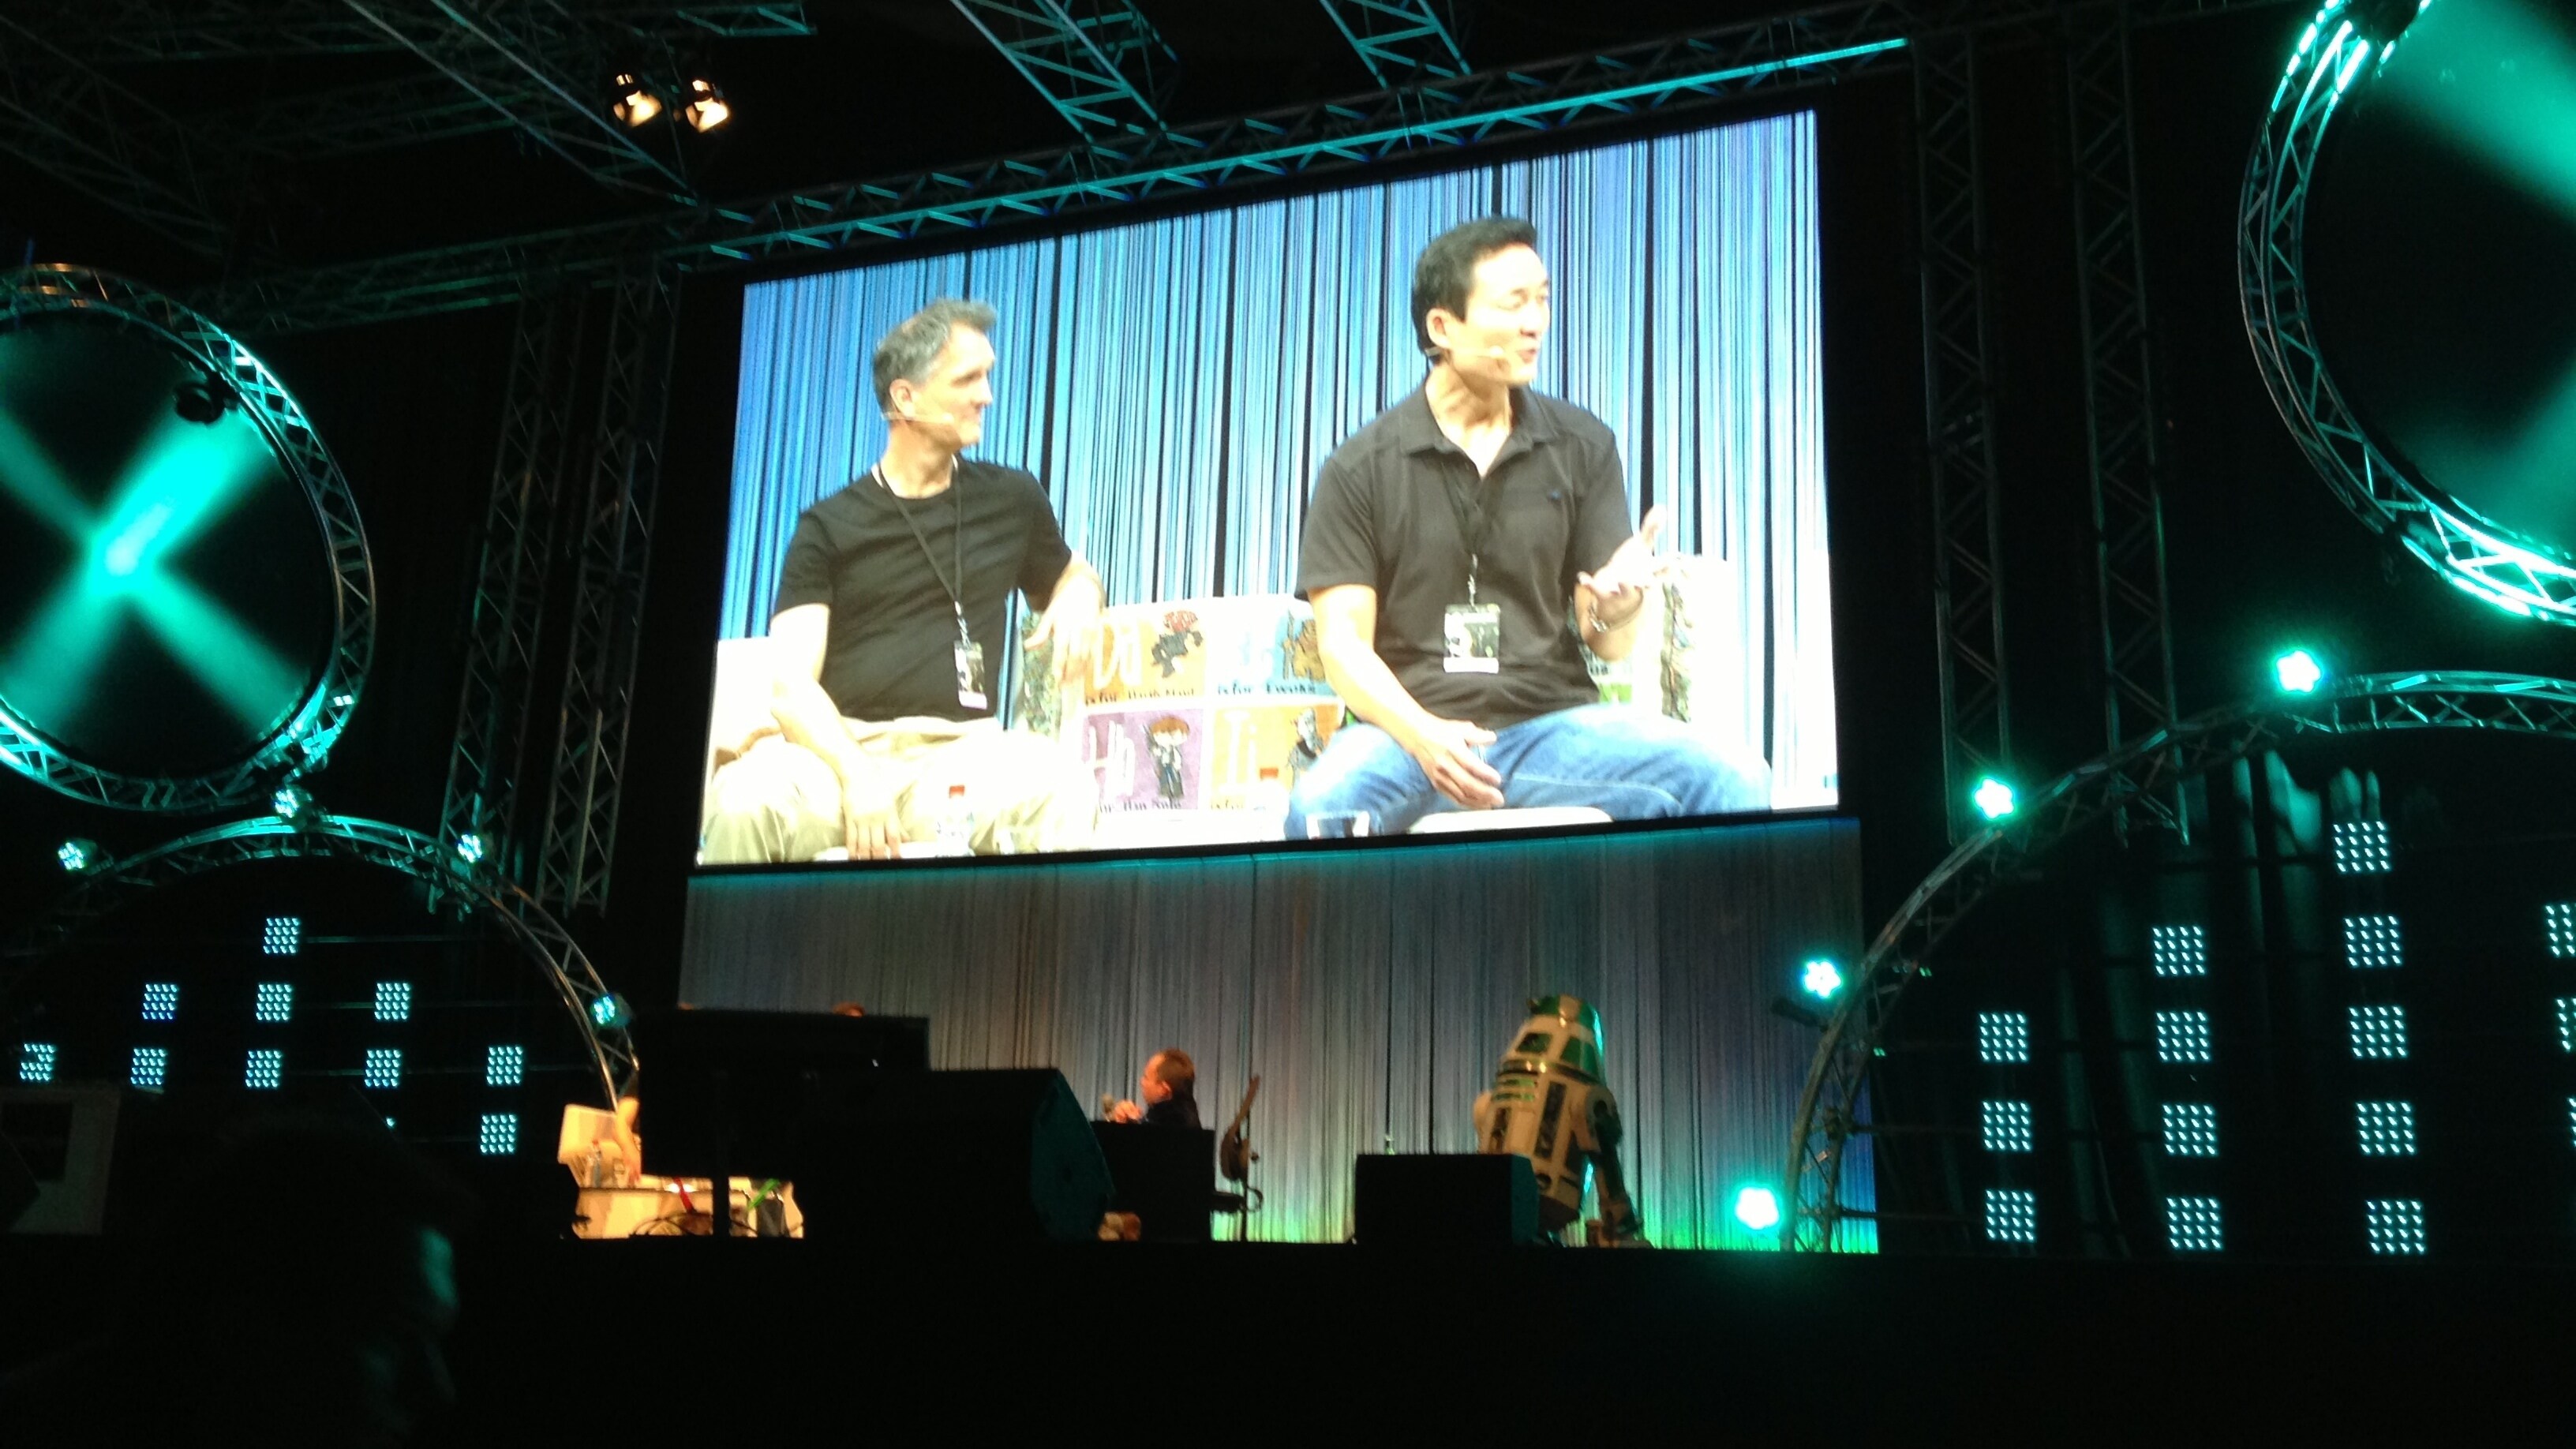 SWCE 2013: "Designing a Galaxy" Panel with Doug Chiang and Iain McCaig - Liveblog